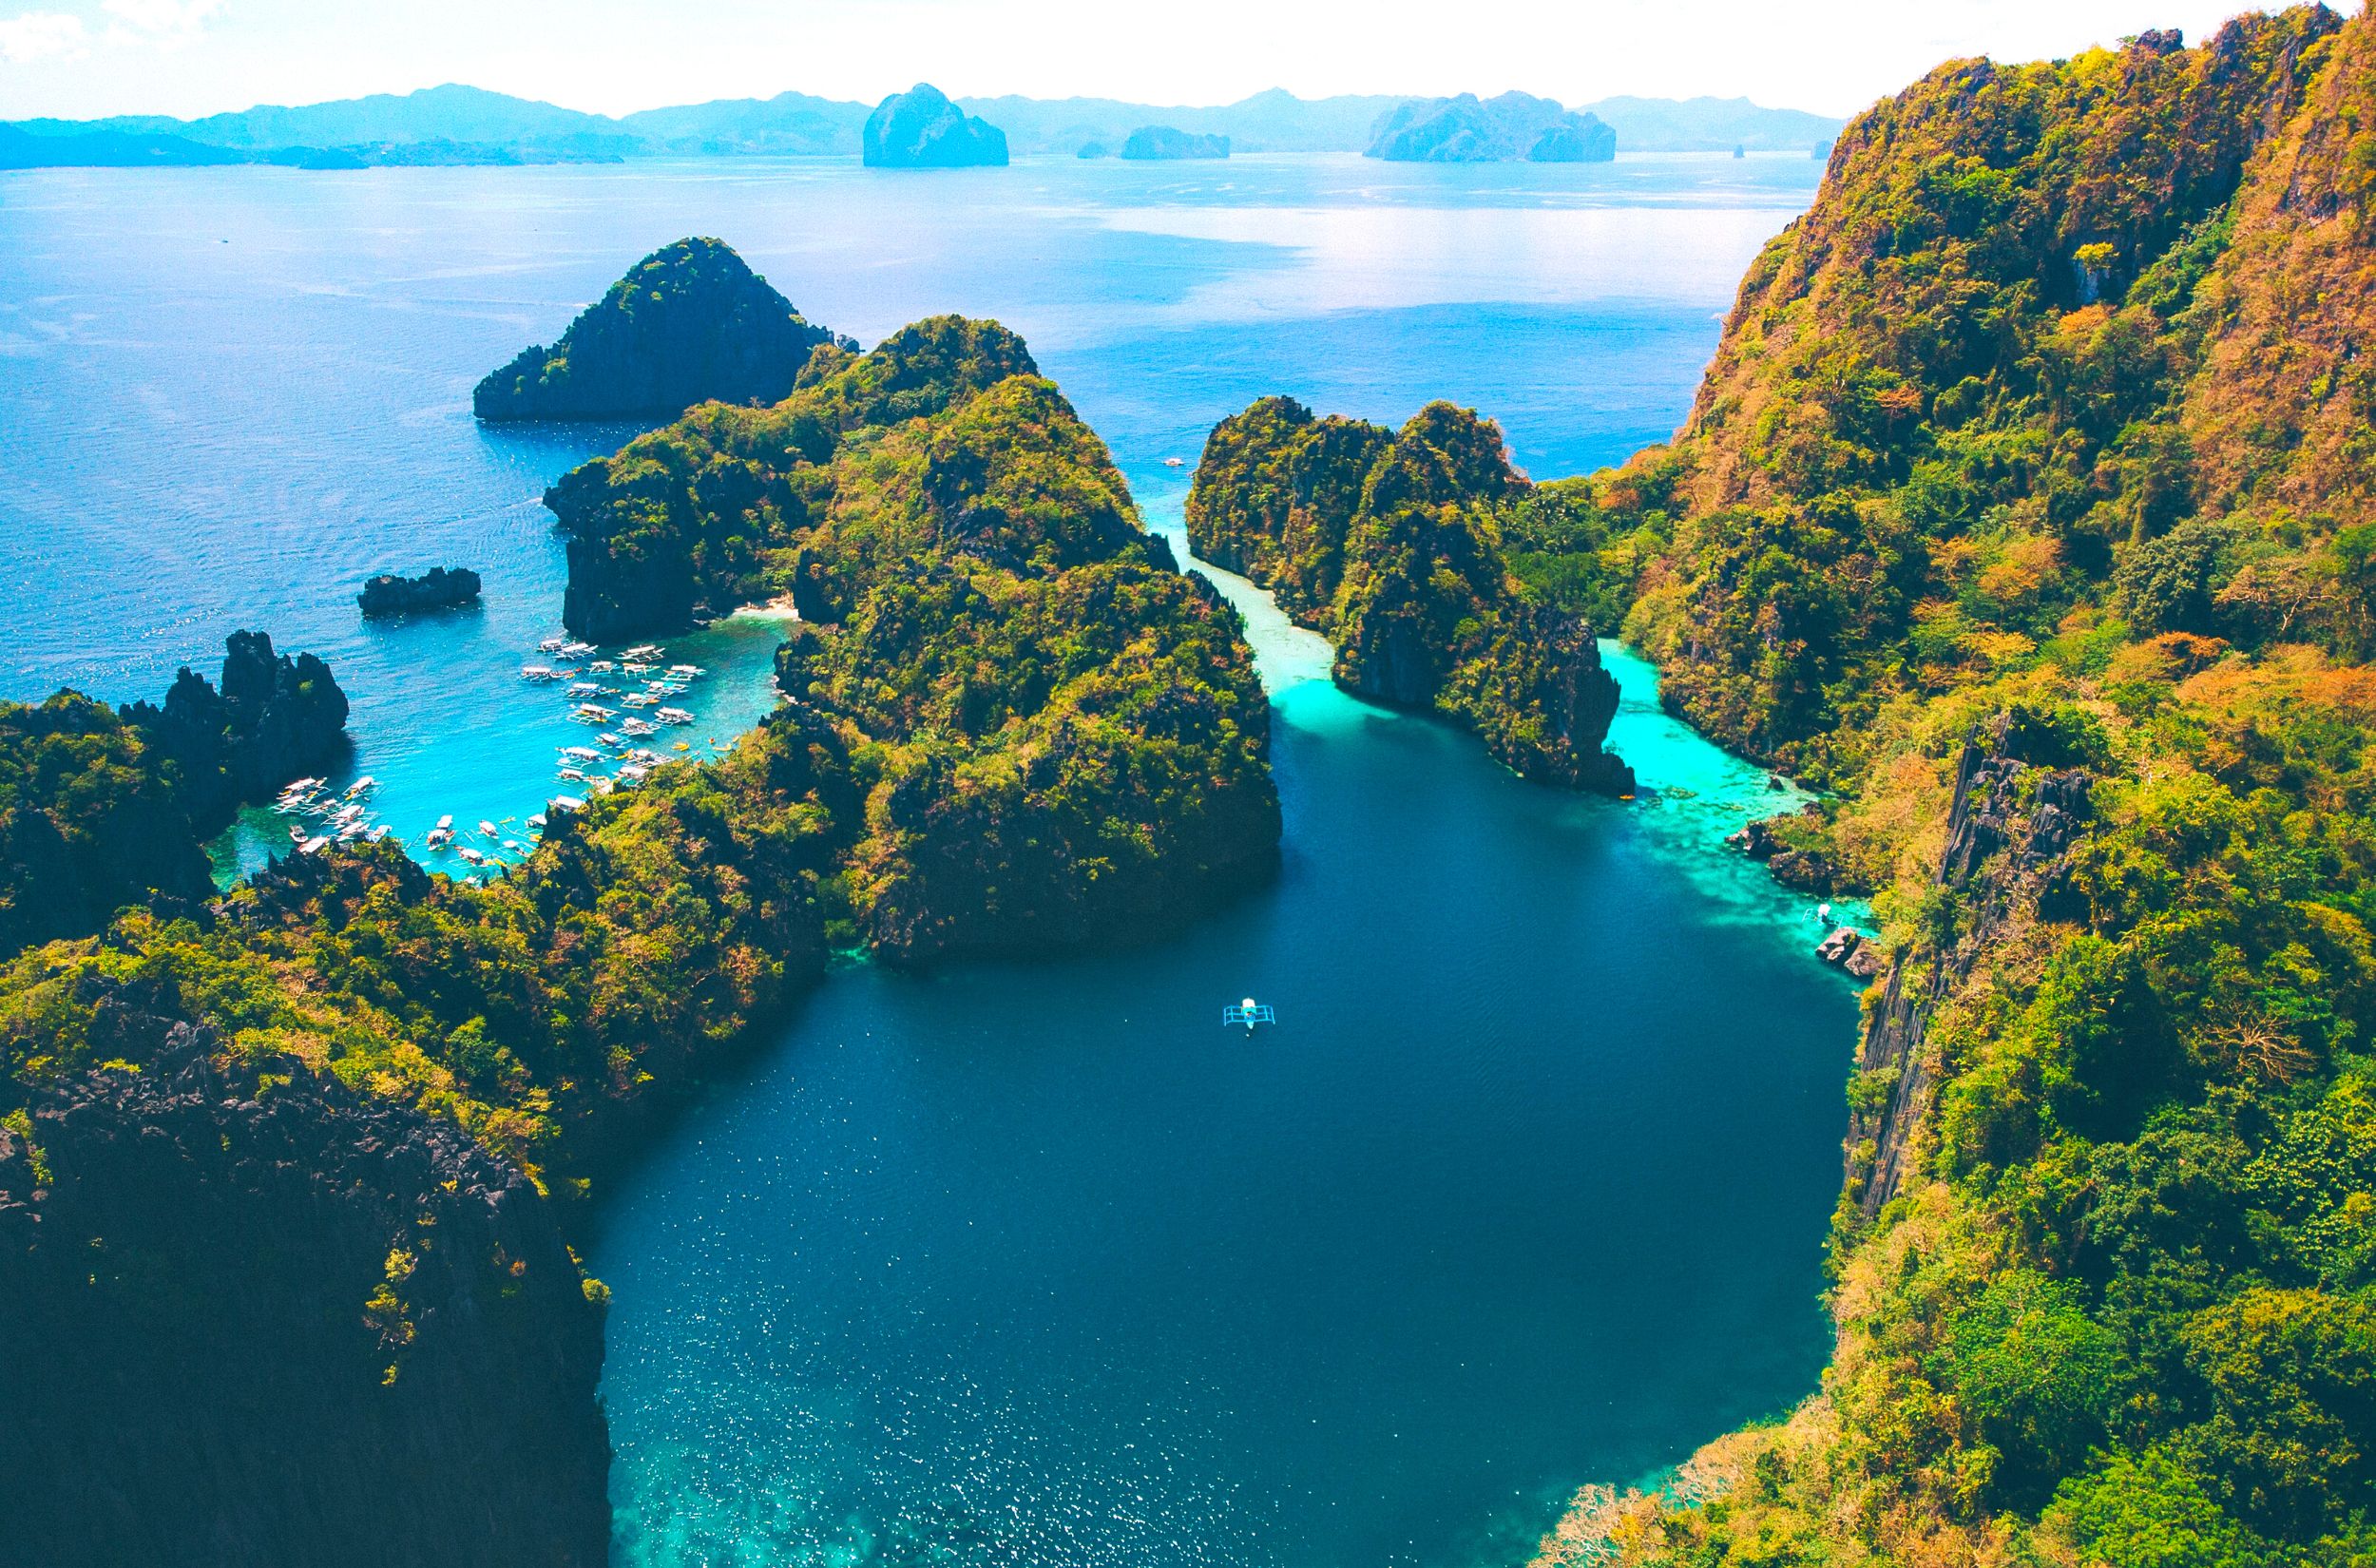 palawan island sky view beautiful backround picture wallpaper best travel images for download world famous travel islands photography Philippines travel pictures drone photography beautiful nature pictures wonderful earth amazing pictures lit of islands collection pictures sea picture nature lover photographs for instagram and facebbok green country travel ideas booking hotels in palawan islands el nido most beautiful islands in the world island travel packages cheap hotel booking palawan island green country travel destinations bird eye nature pictures free download